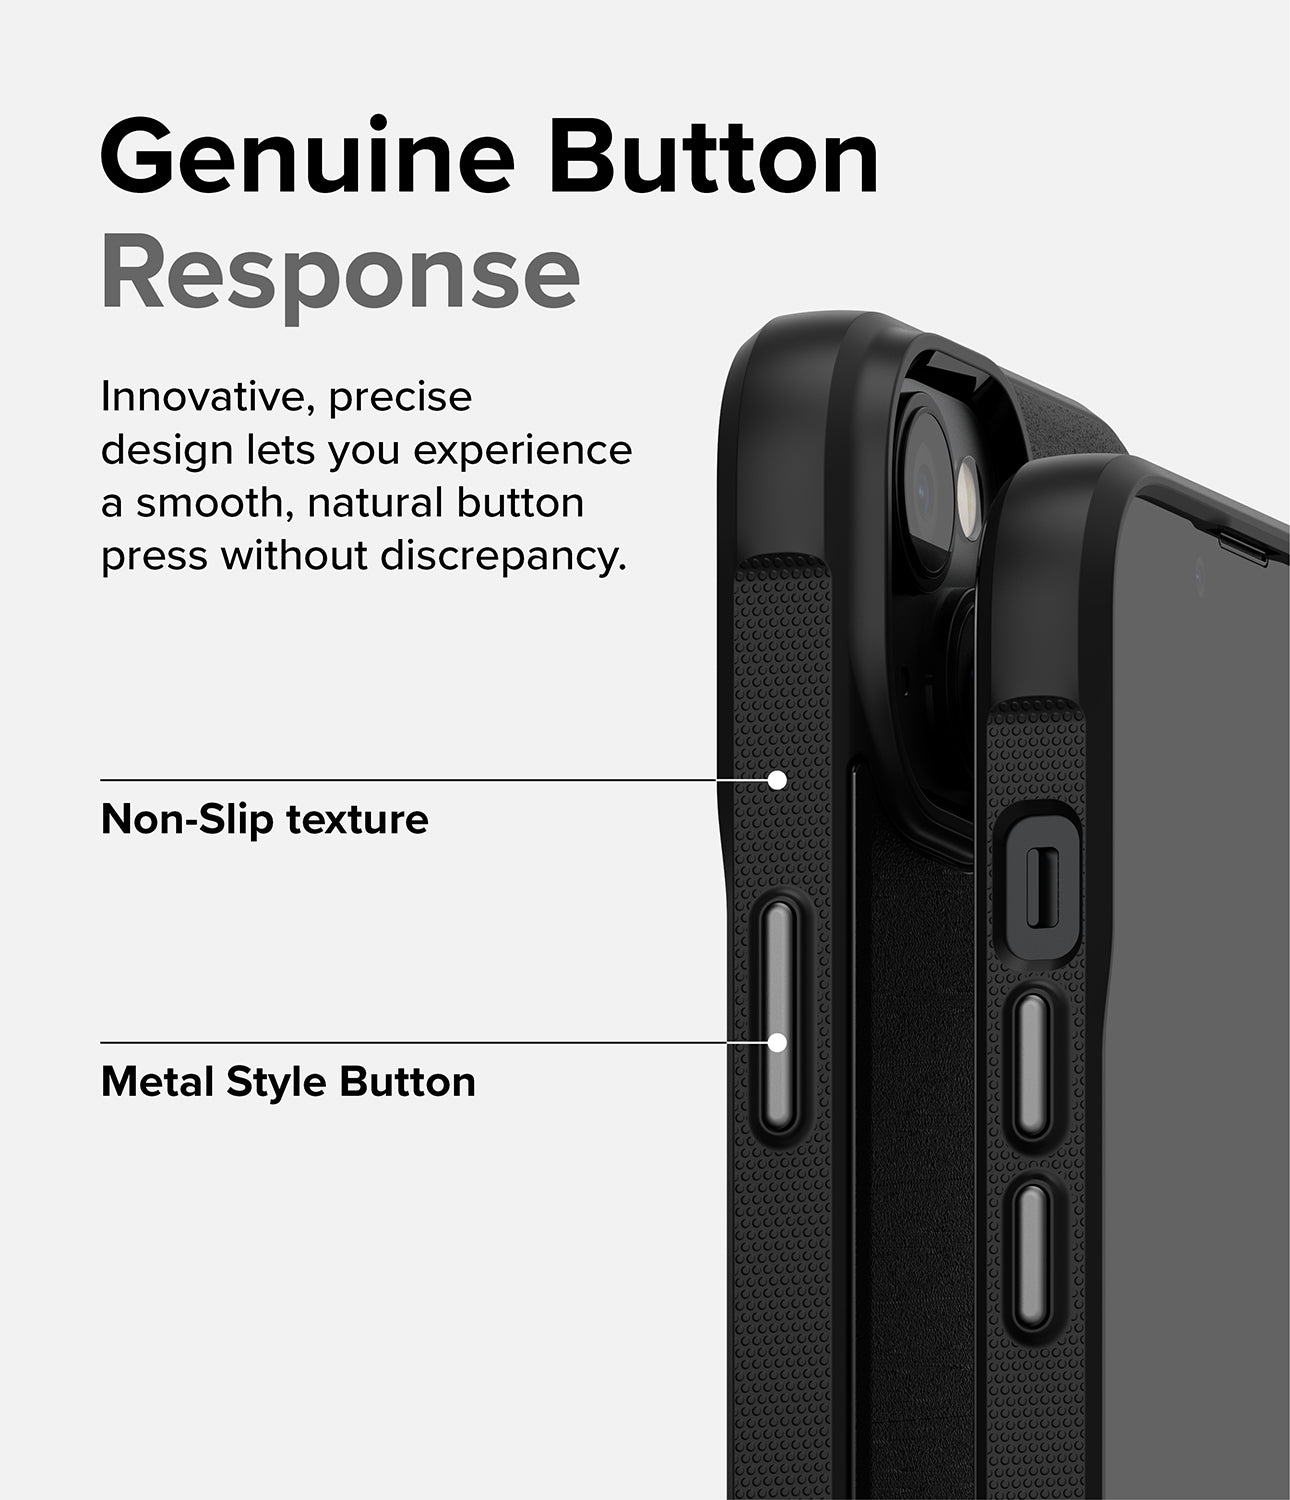 iPhone 14 Case | Onyx - Black - Genuine Button Response. Innovative, precise design lets you experience a smooth, natural button press without discrepancy. Non-Slip texture. Metal Style Button